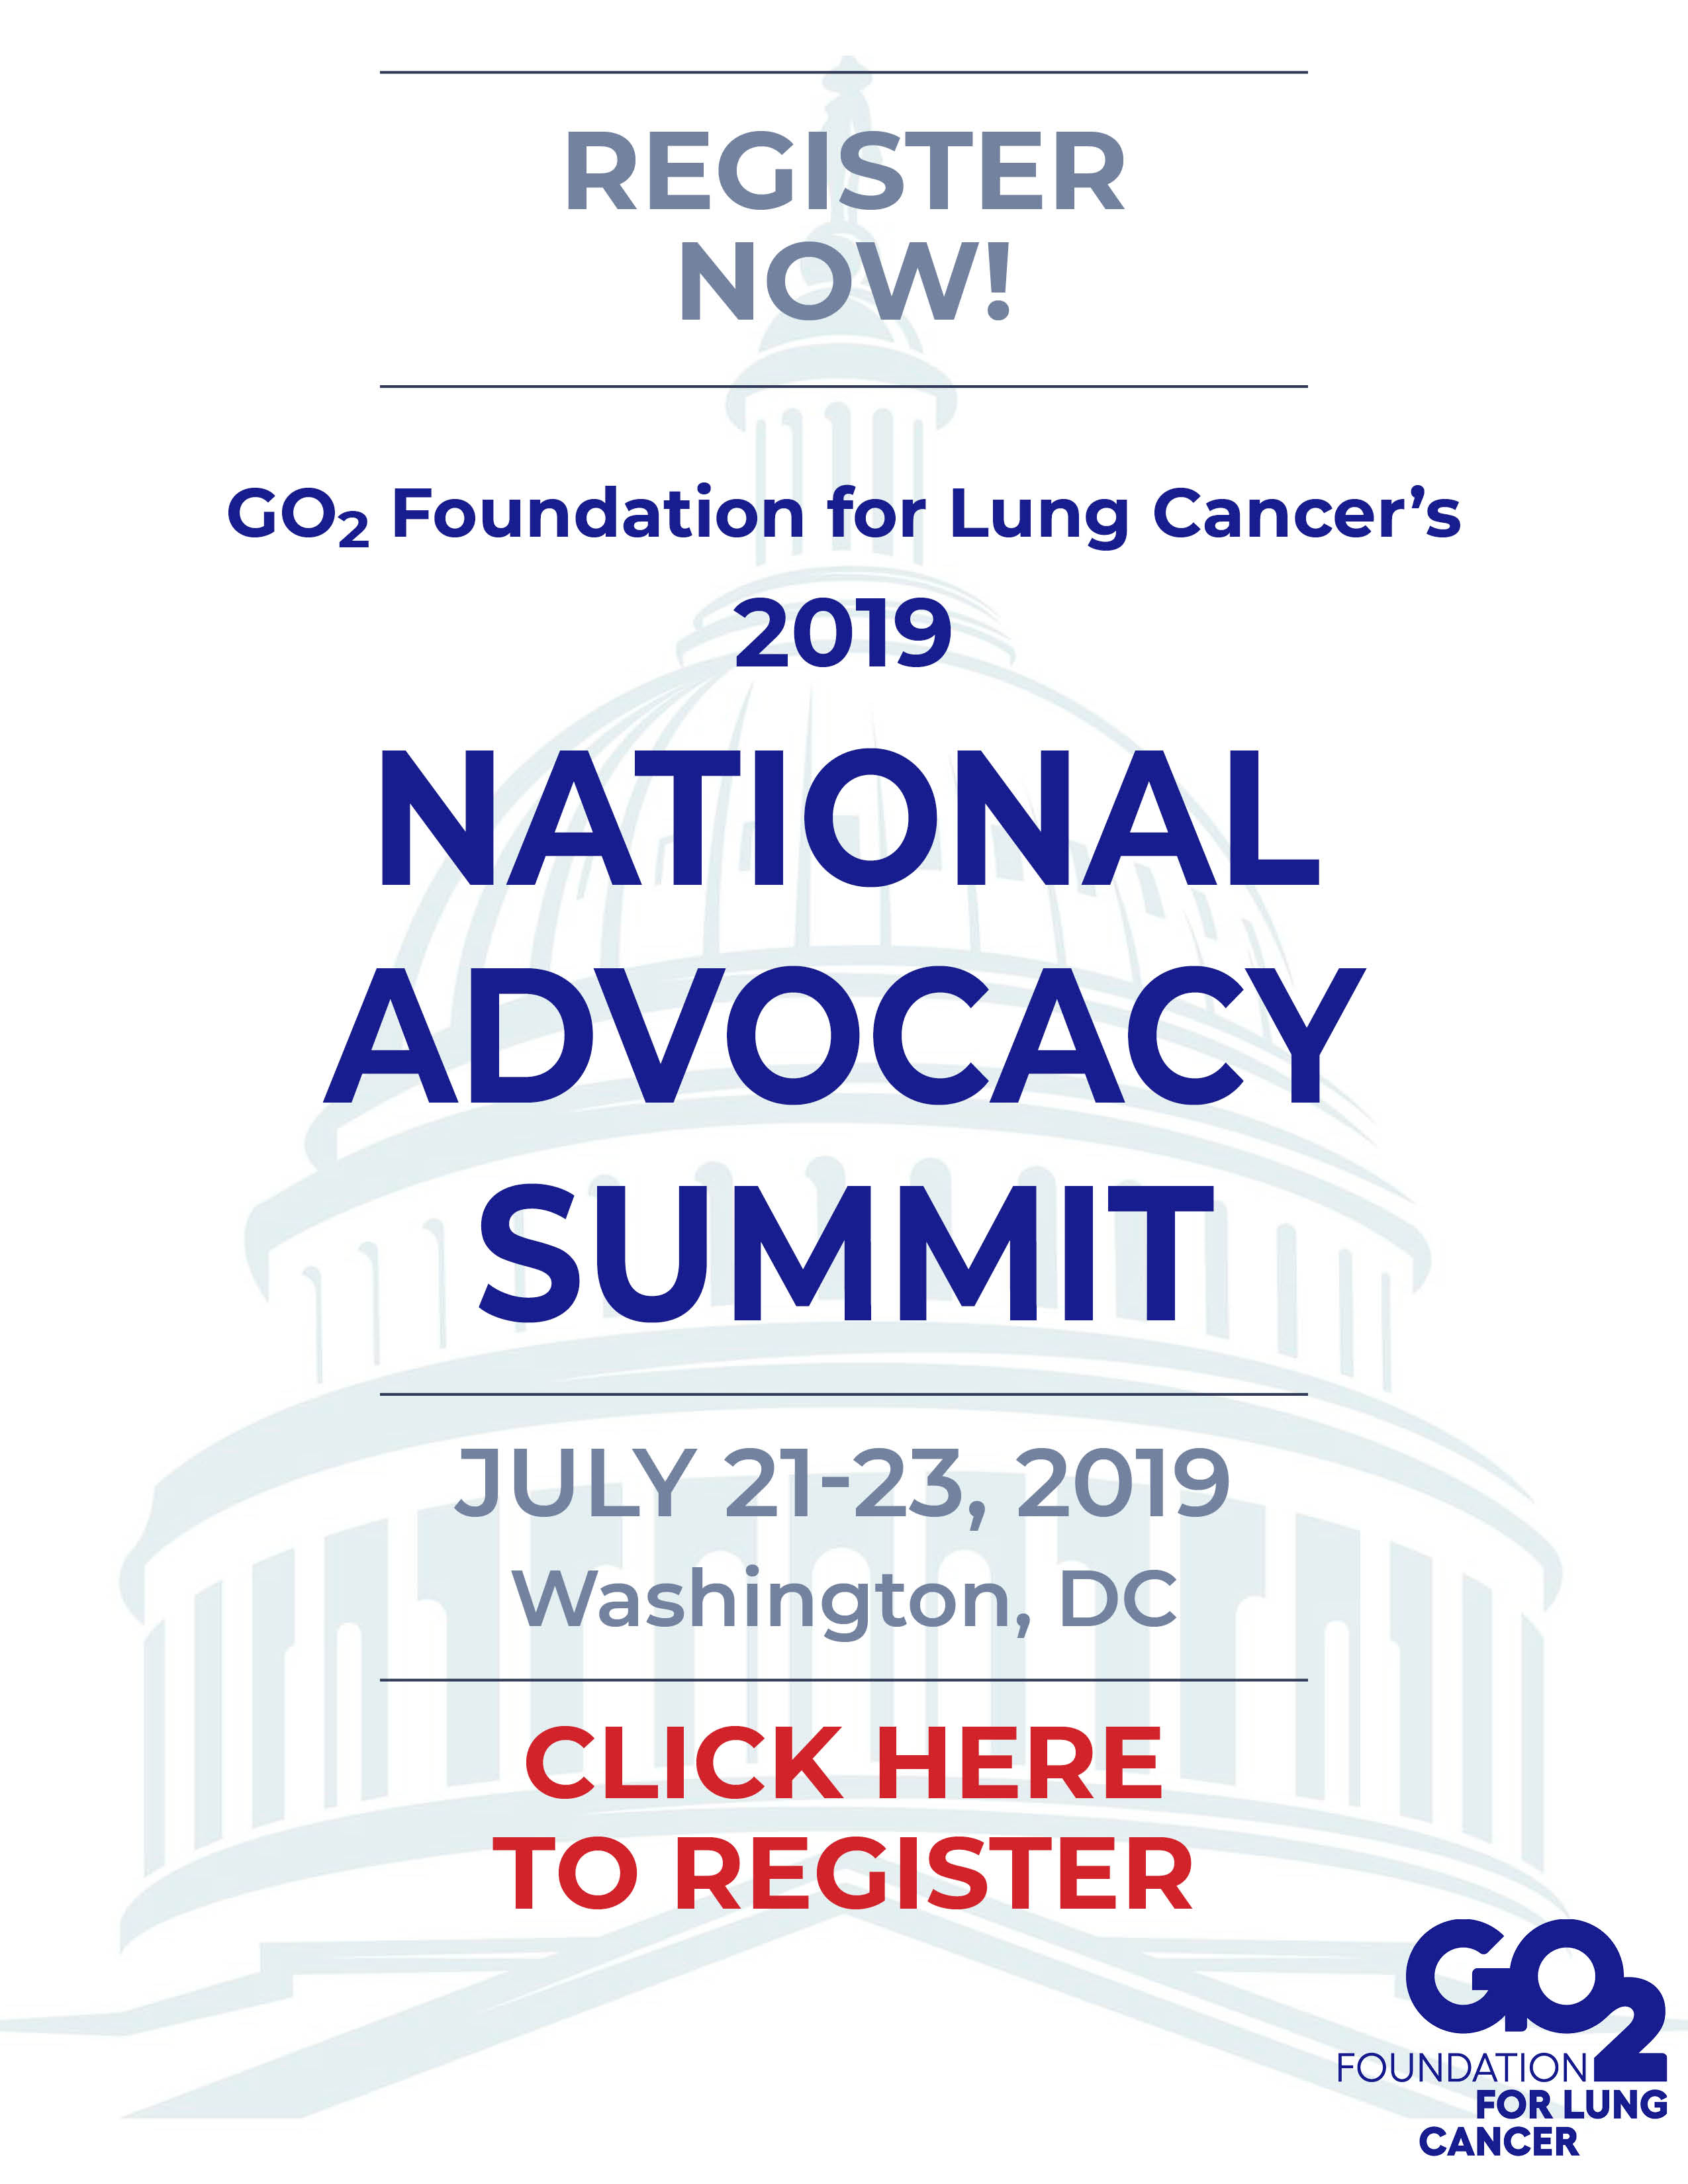 Register for GO2 for Lung Cancer's National Advocacy Summit